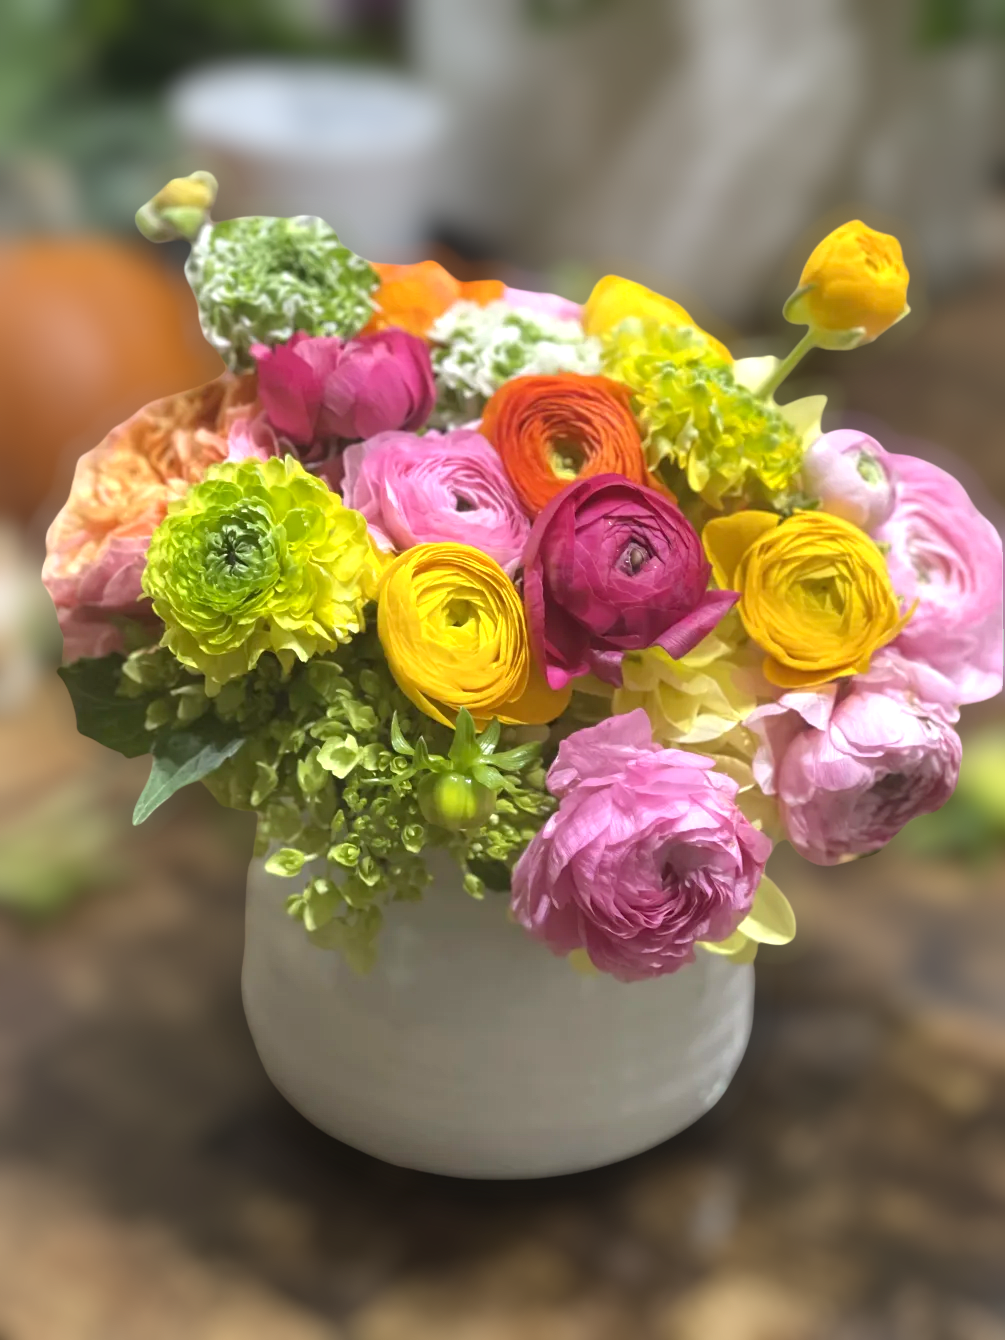 A high quality ceramic vase filled with dainty ranunculus and other specialty